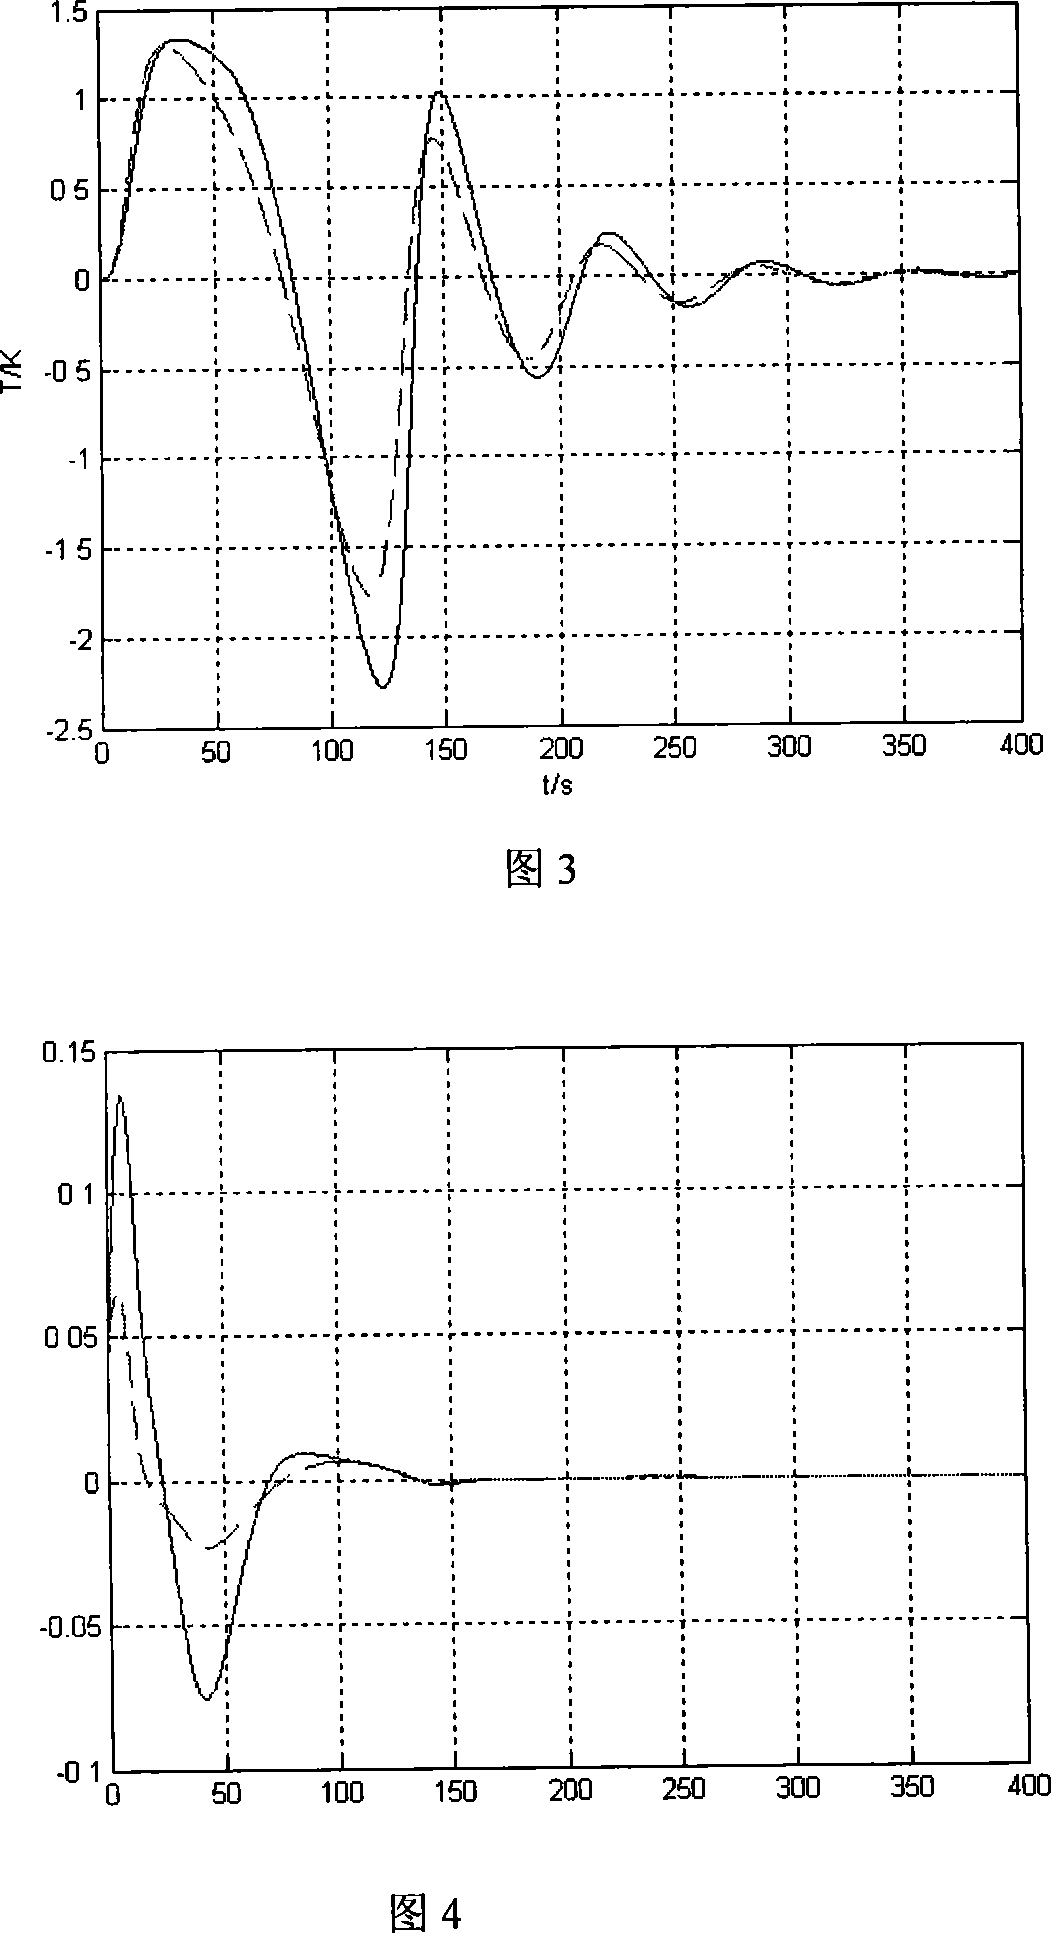 Control device of nuclear power plant based on fuzzy decoupling and coordinating control method